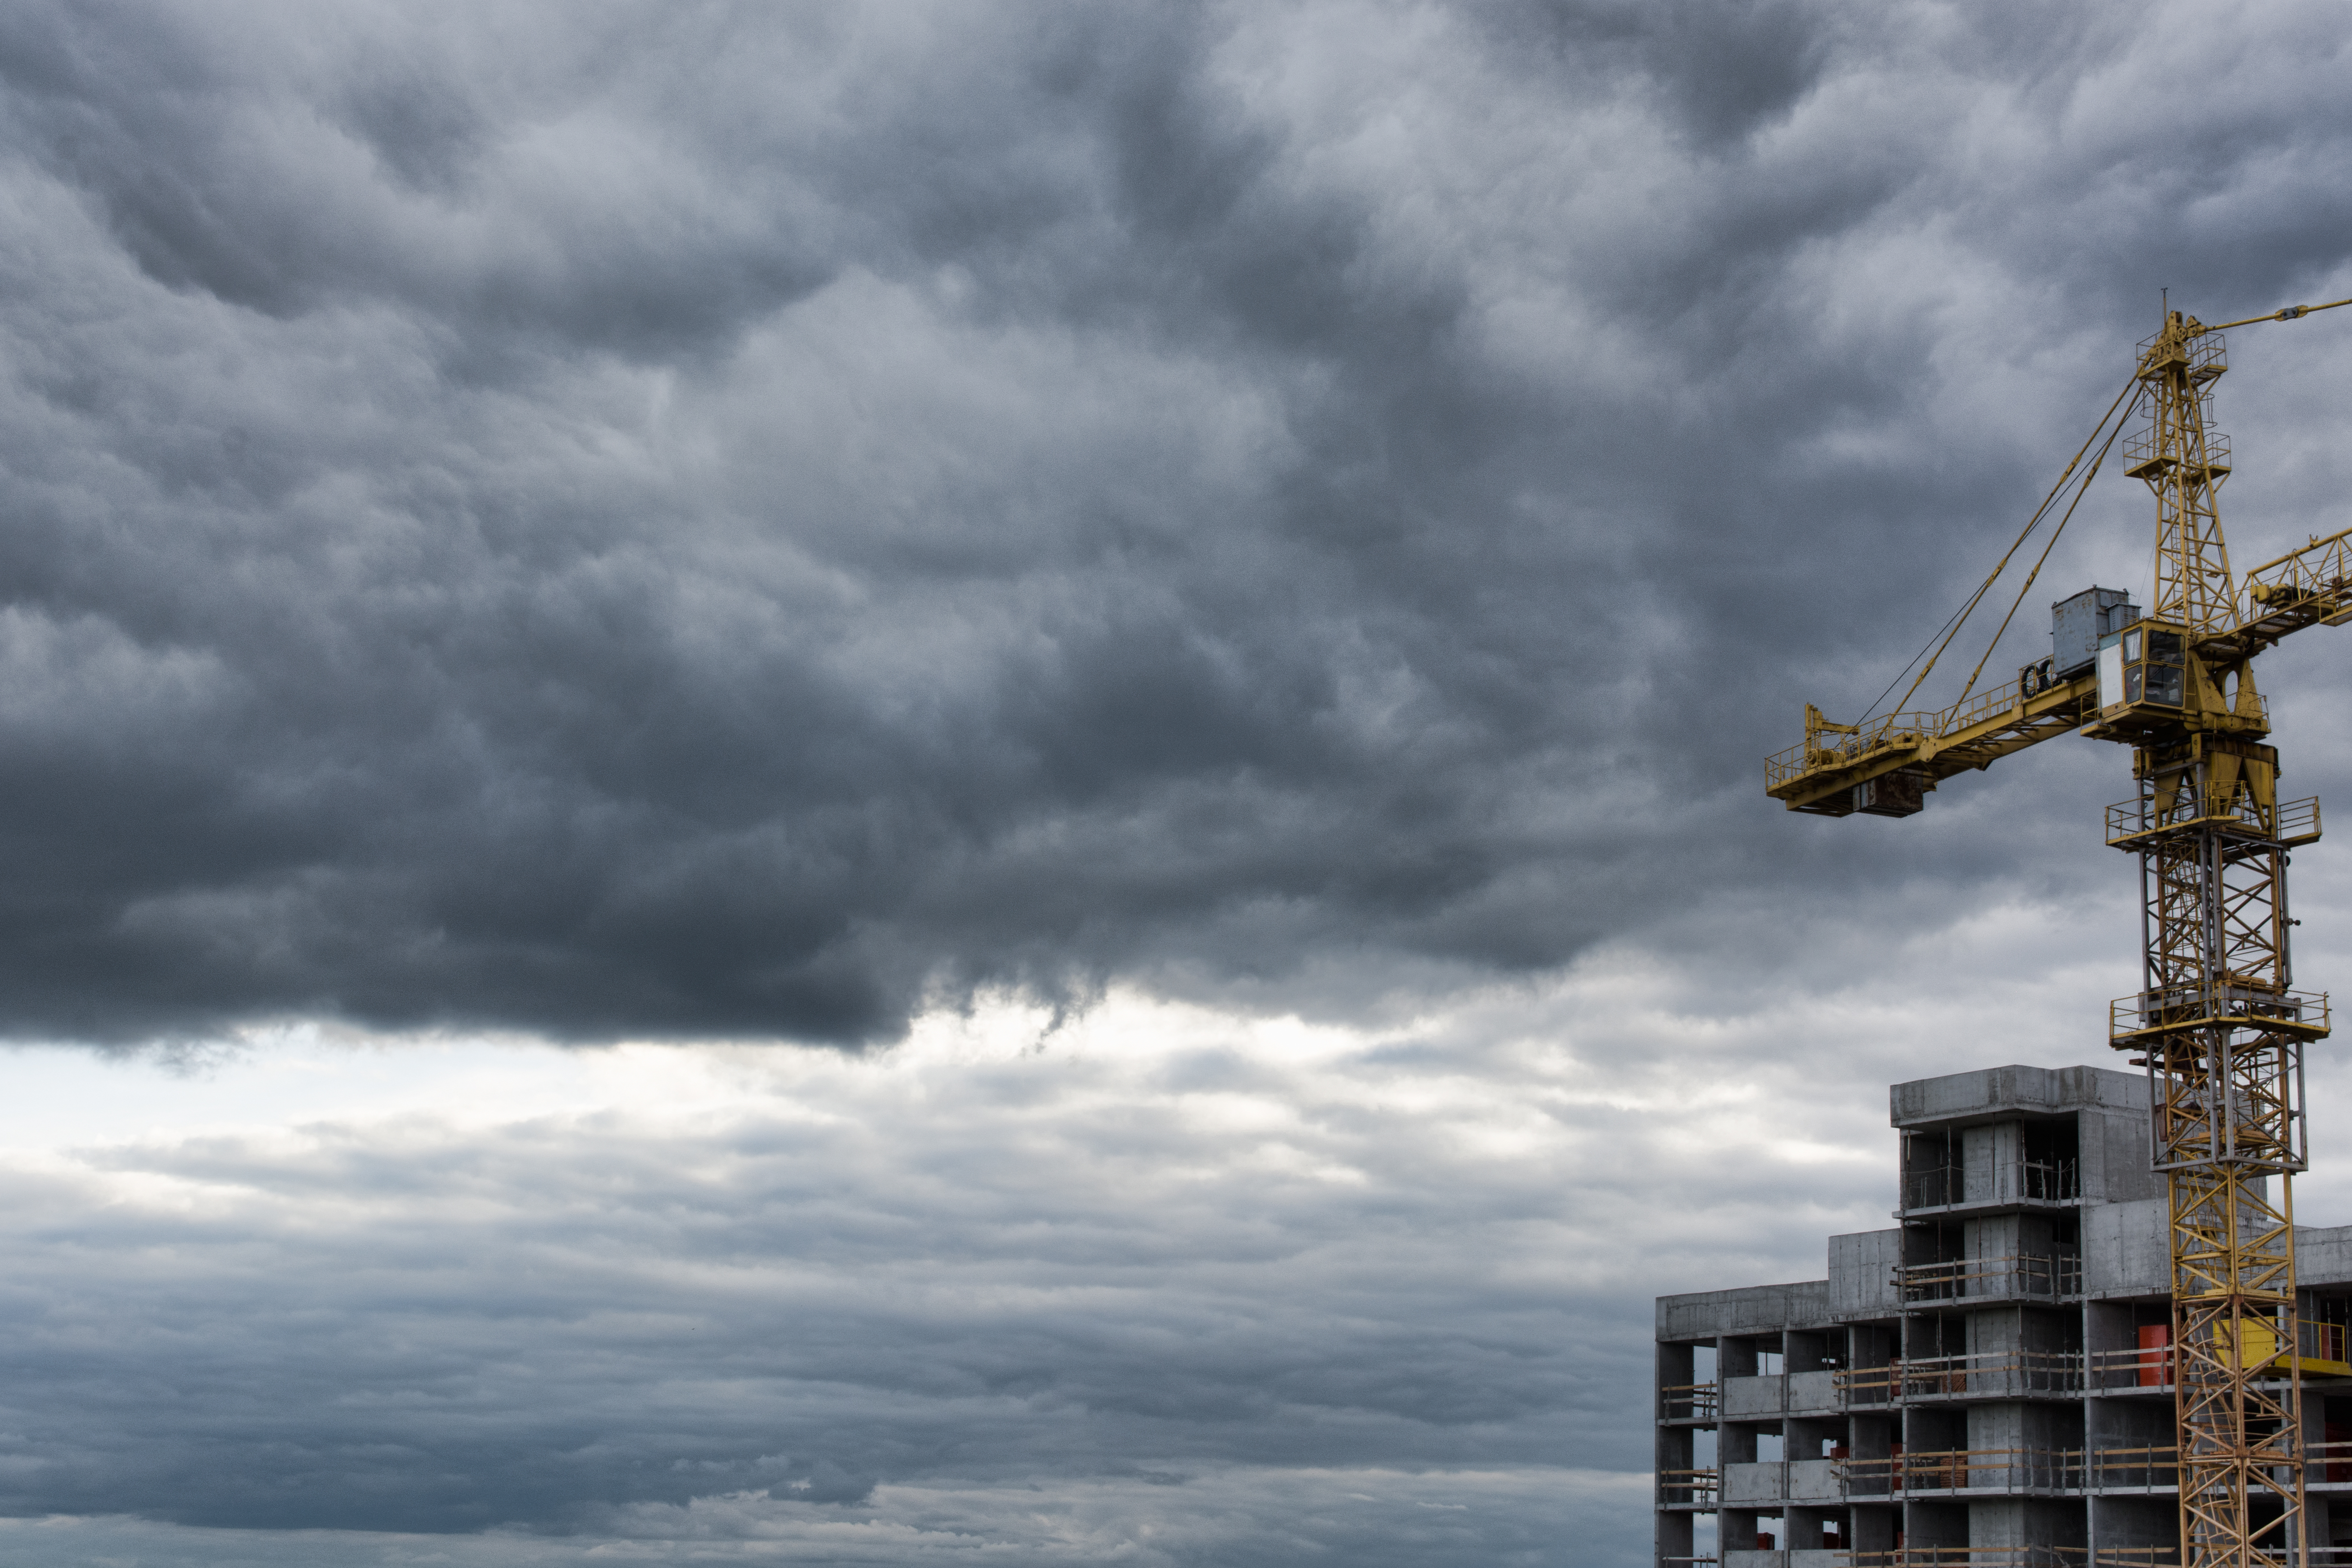 Industrial,Construction,Cranes,And,Building,Site,Over,Stormy,Sky.,Grunge